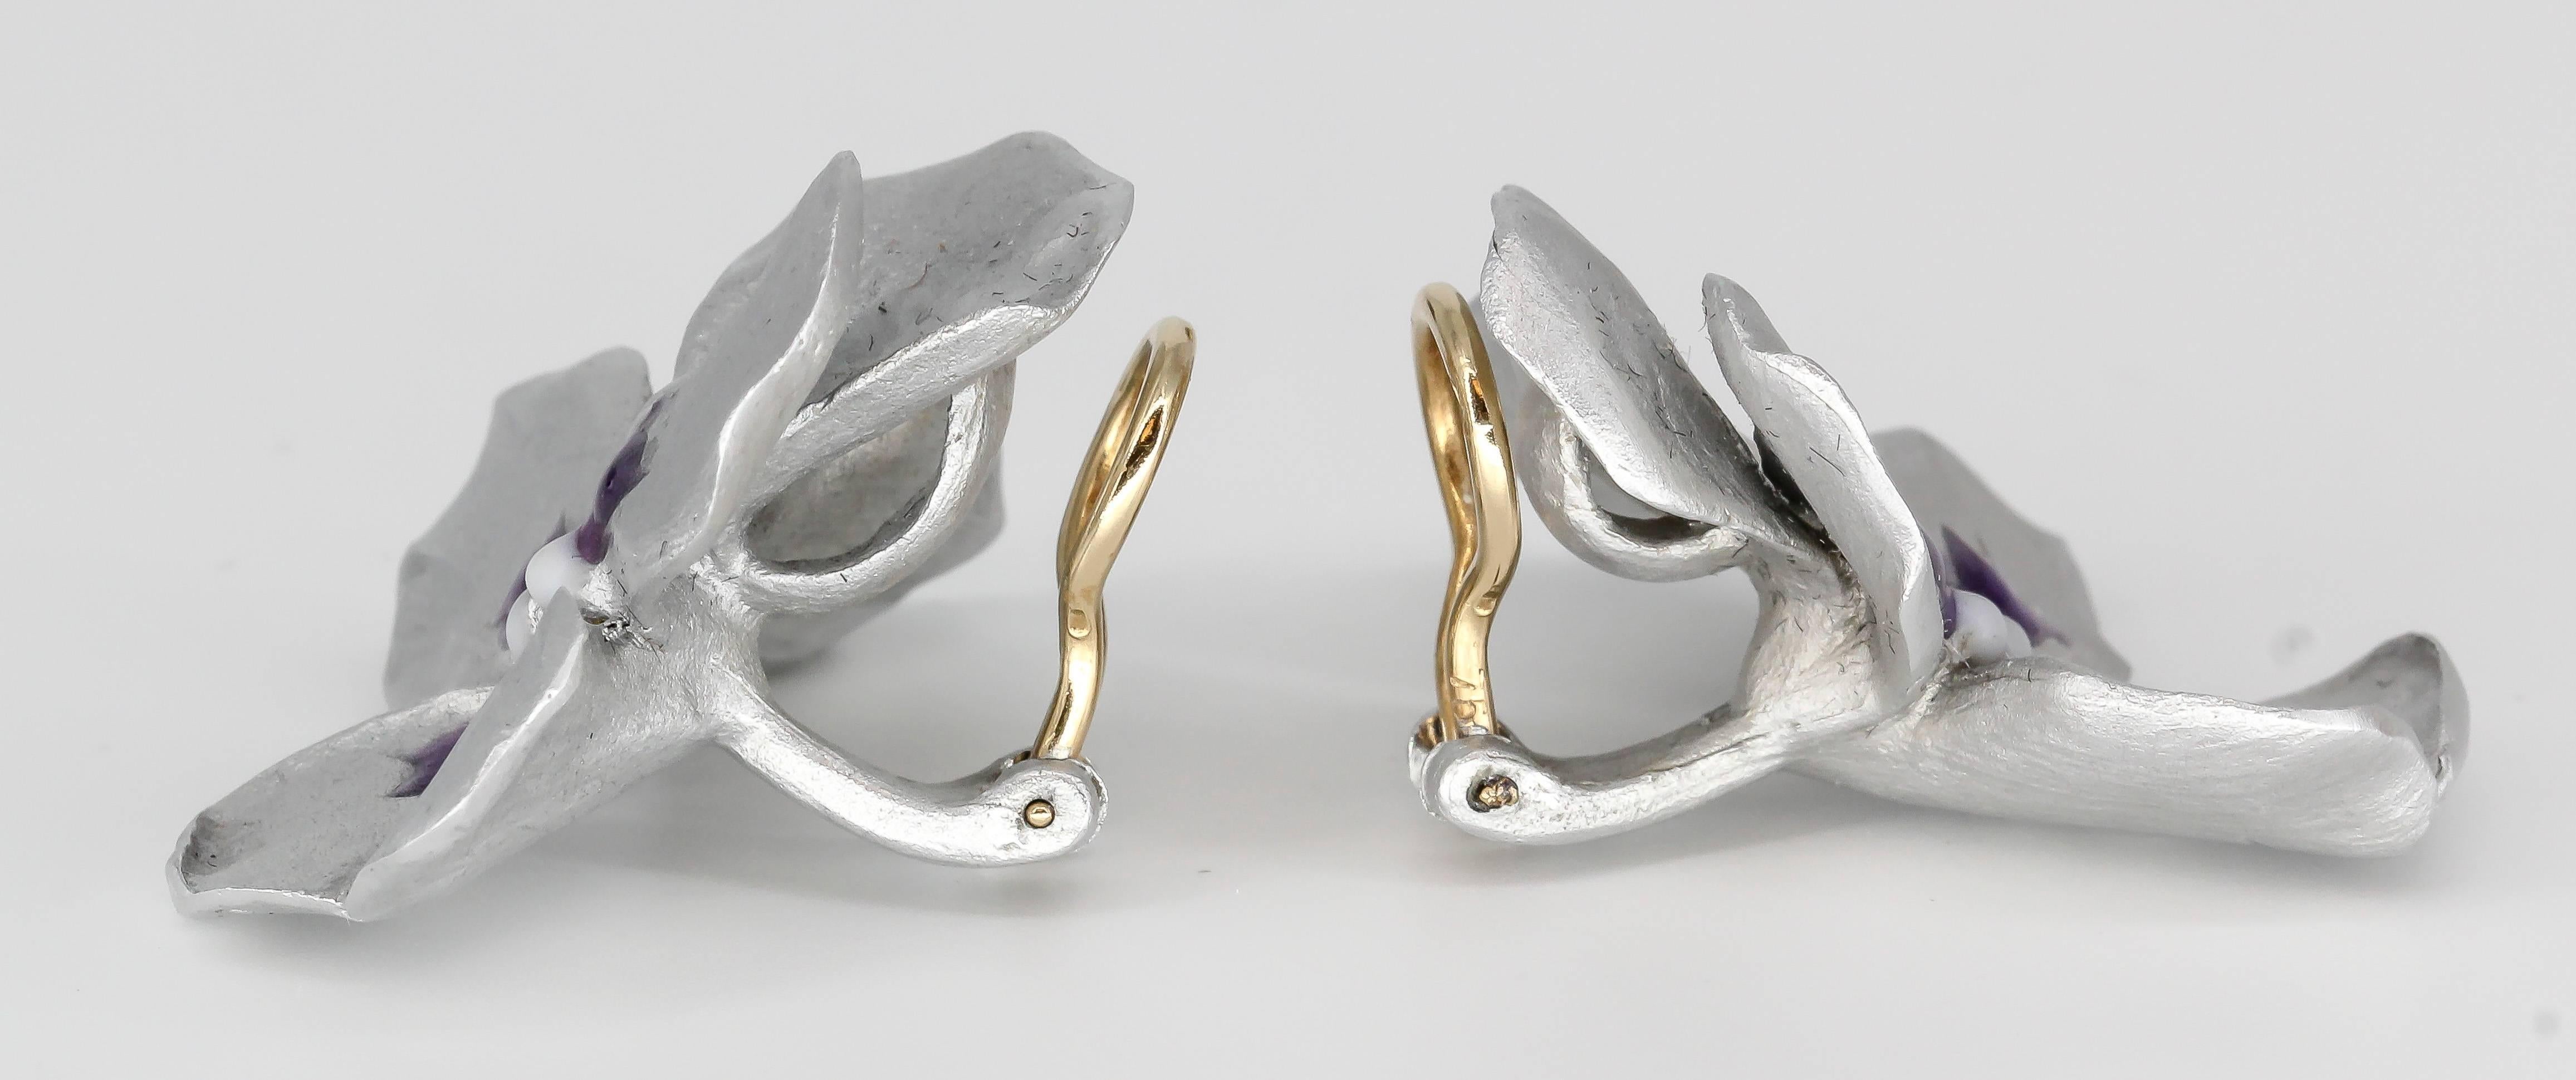 Unusual and rare aluminum and gold earrings by JAR. They feature an unusual design which resembles flower petals. Beautifully made and easy to wear anywhere.

Hallmarks: Jar, aluminum, French 18k gold assay mark, maker's mark